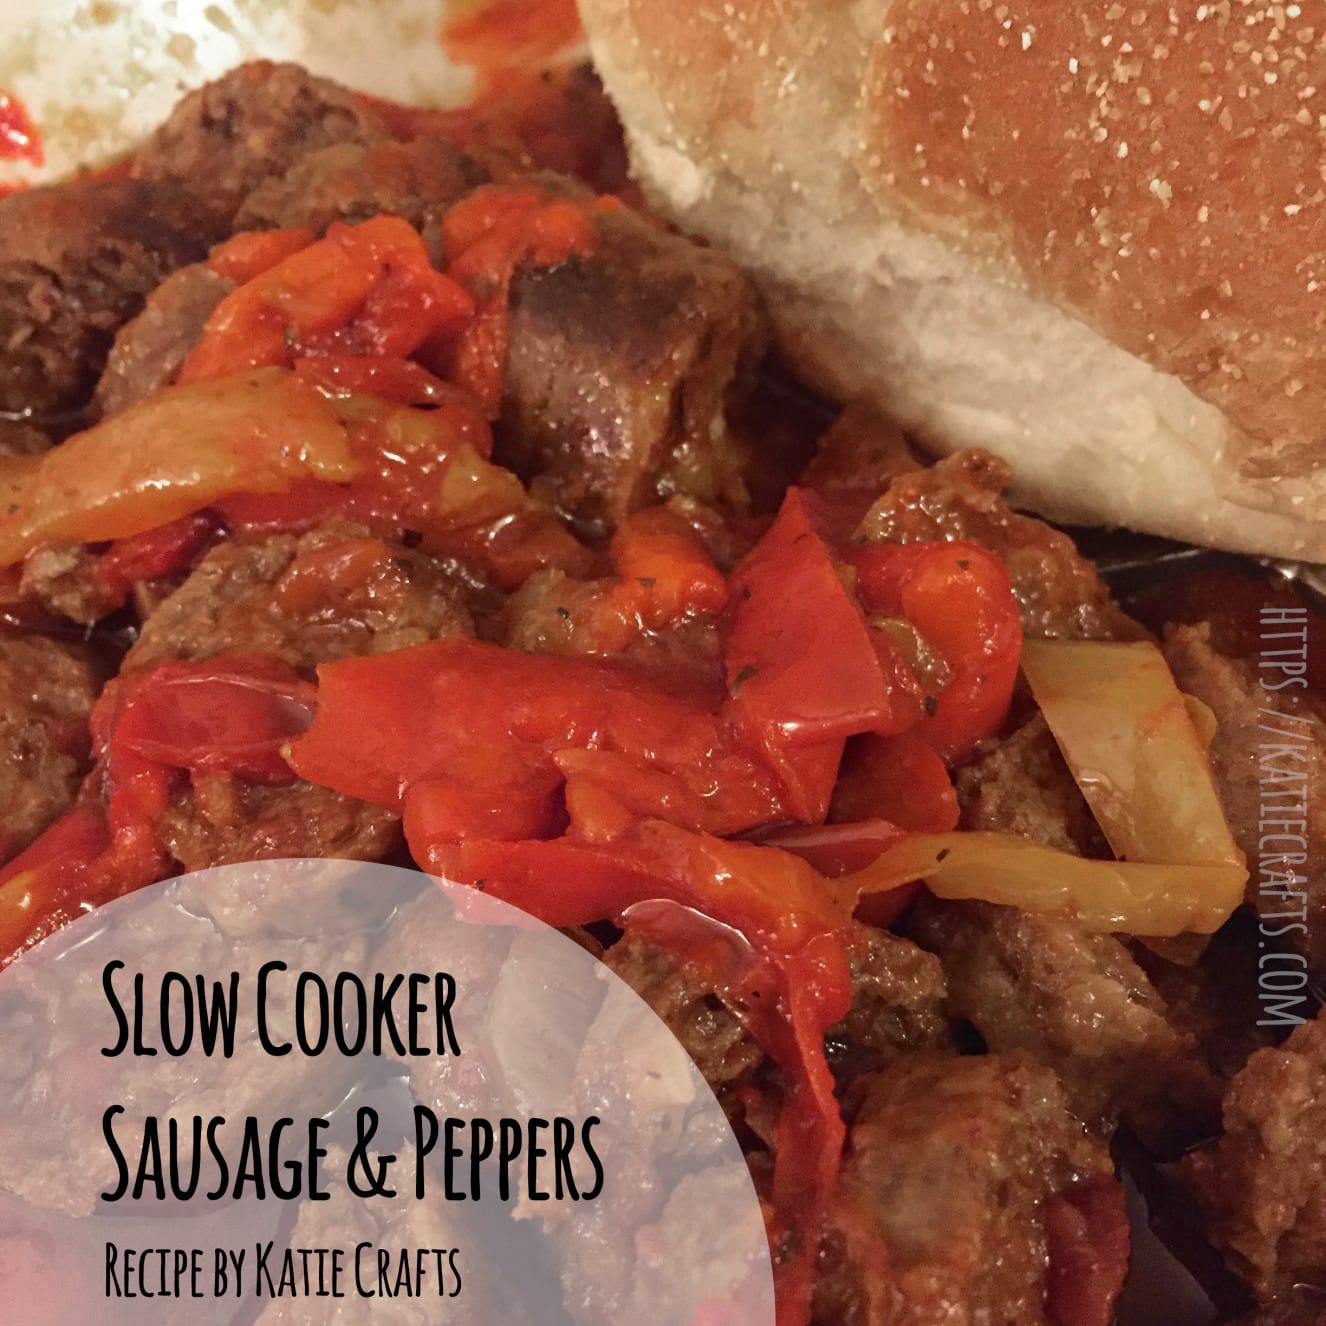 Slow Cooker Sausage and Peppers Recipe by Katie Crafts; https://www.katiecrafts.com